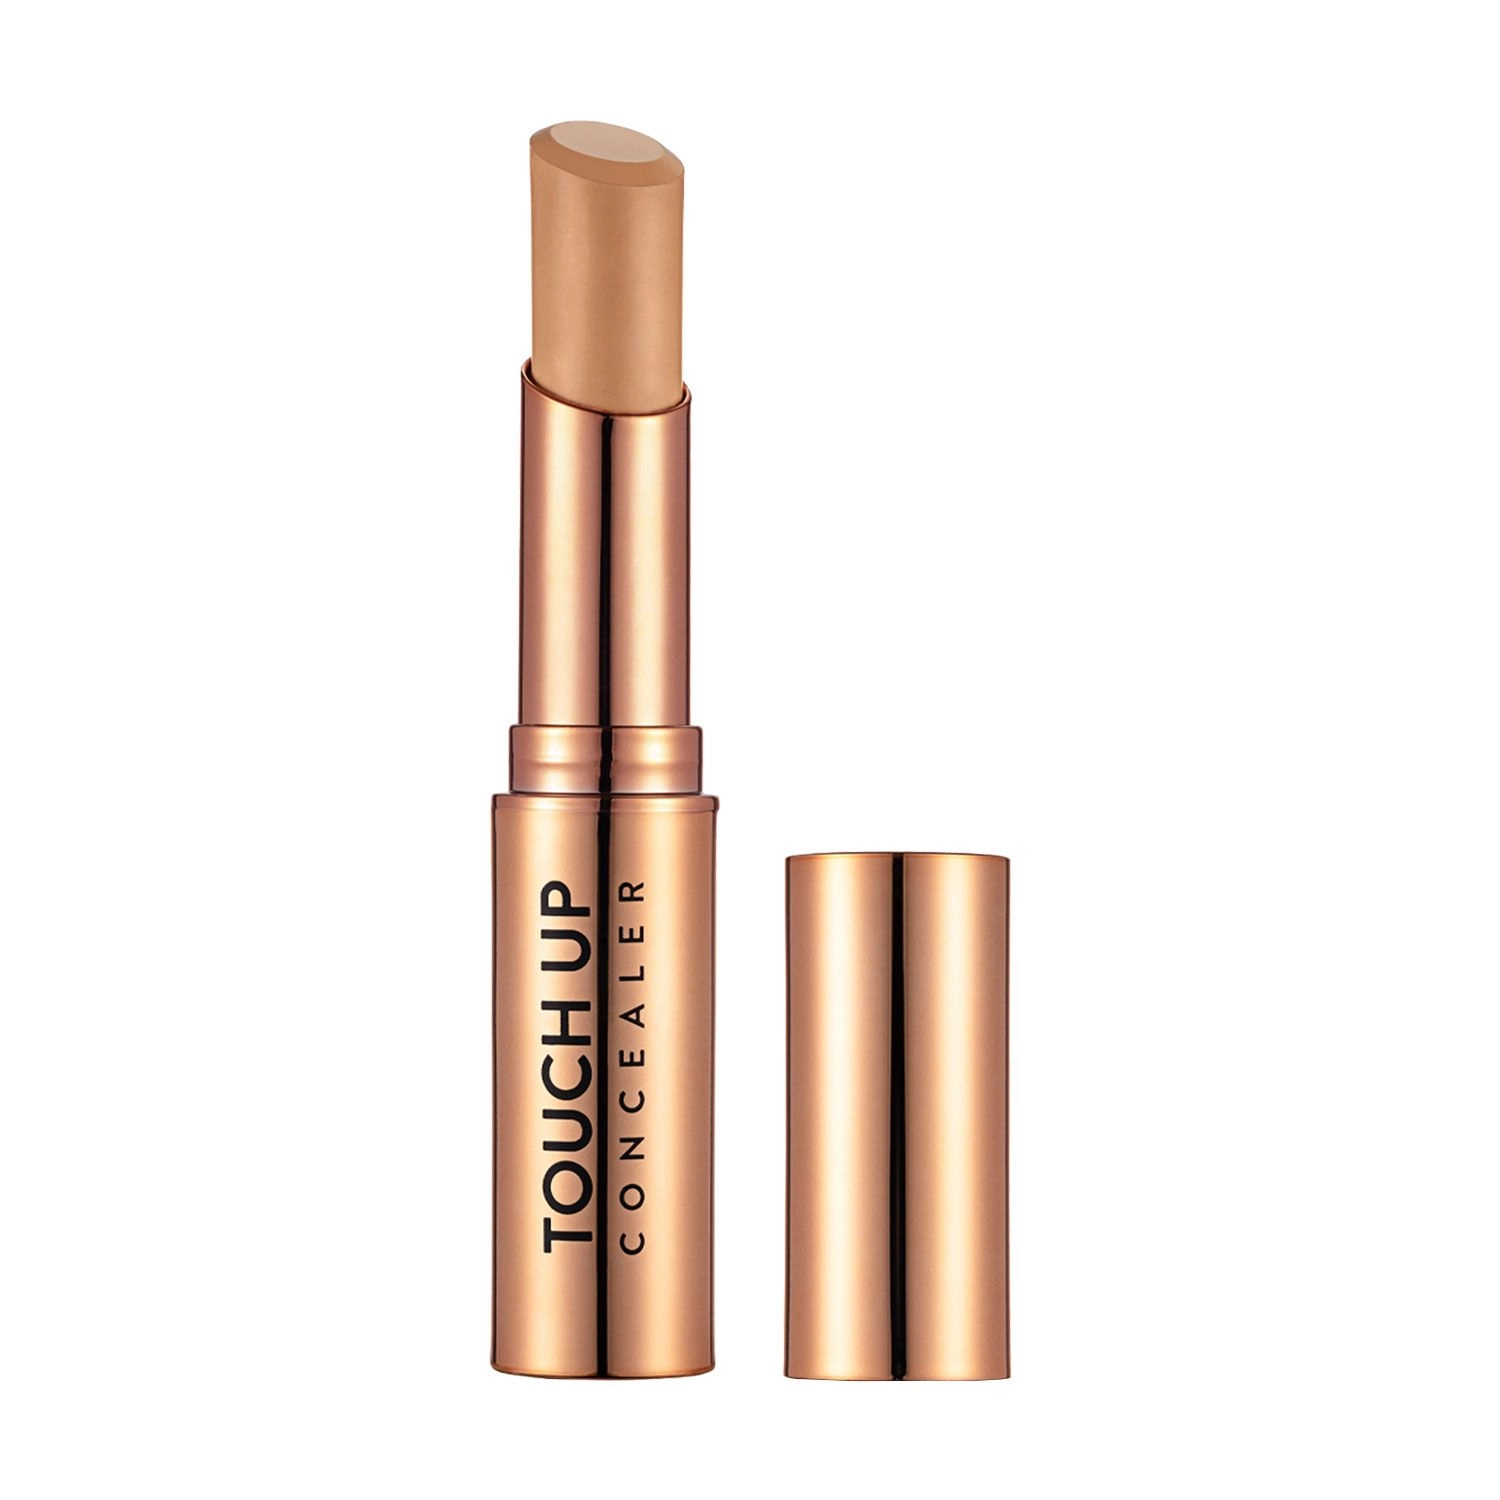 Flormar Консилер-стик для лица Touch Up Concealer, 3.5 г - фото N1